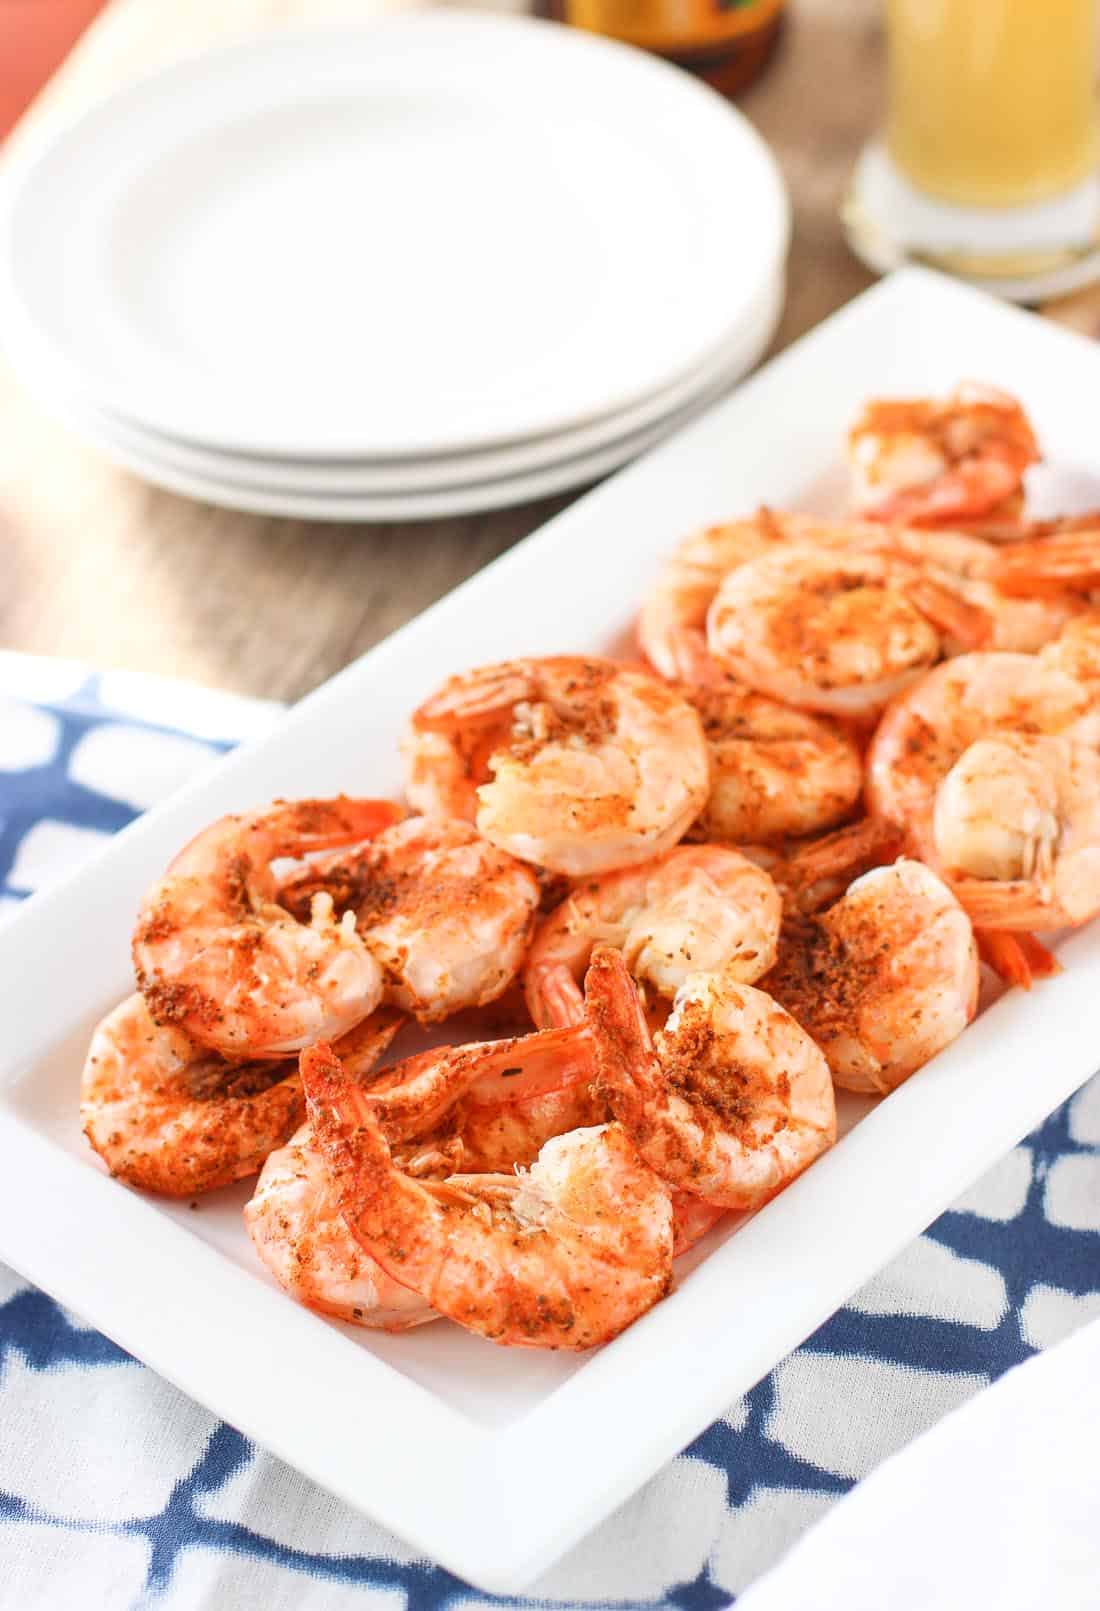 Steamed and seasoned tail- and shell-on shrimp on a tray.